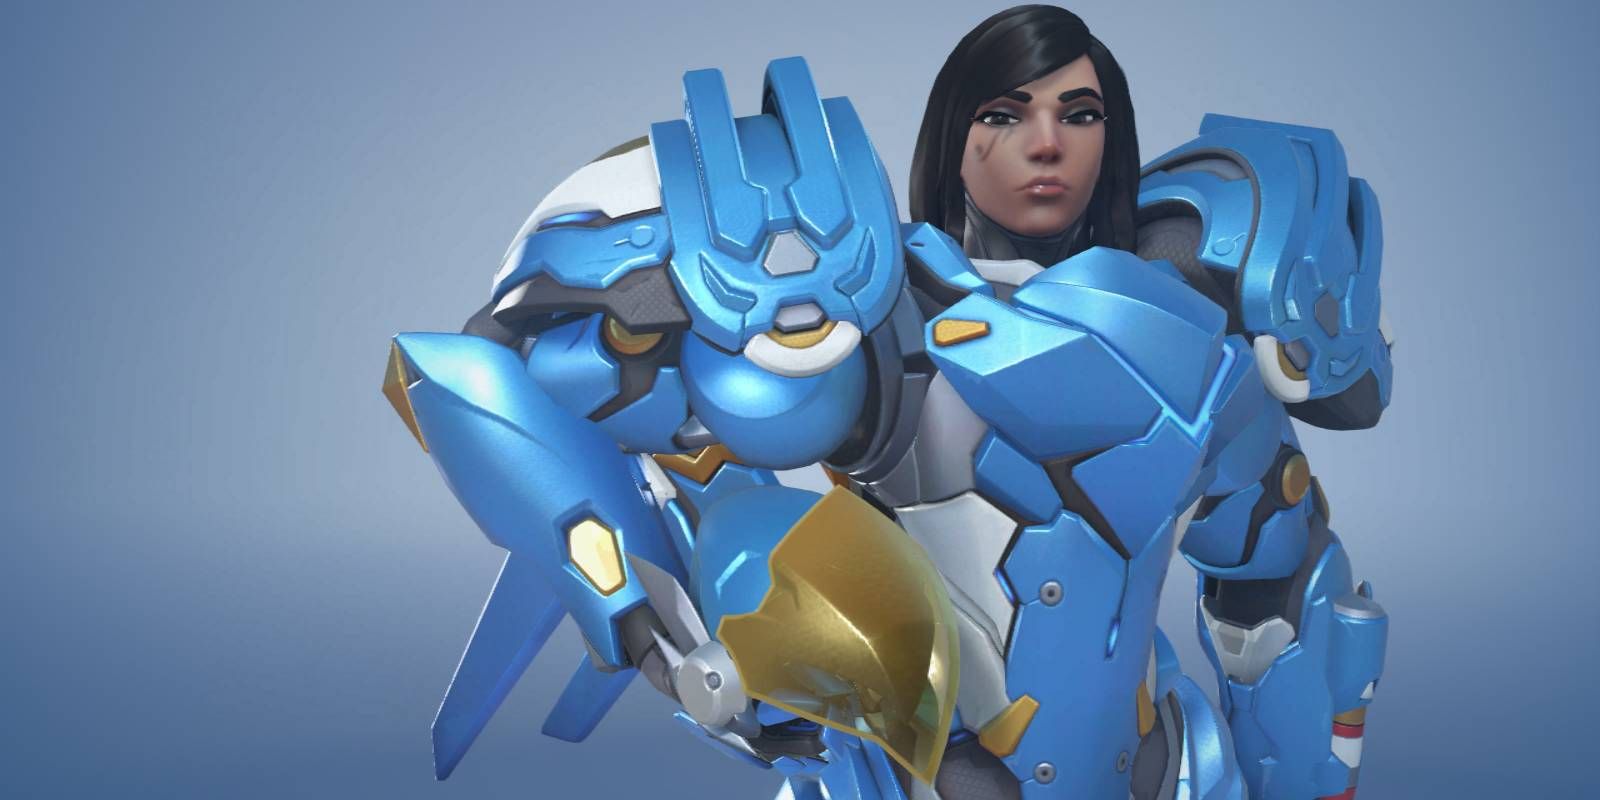 Overwatch 2 Pharah New Design Staring at Camera Character Select Screenshot with Blue Background